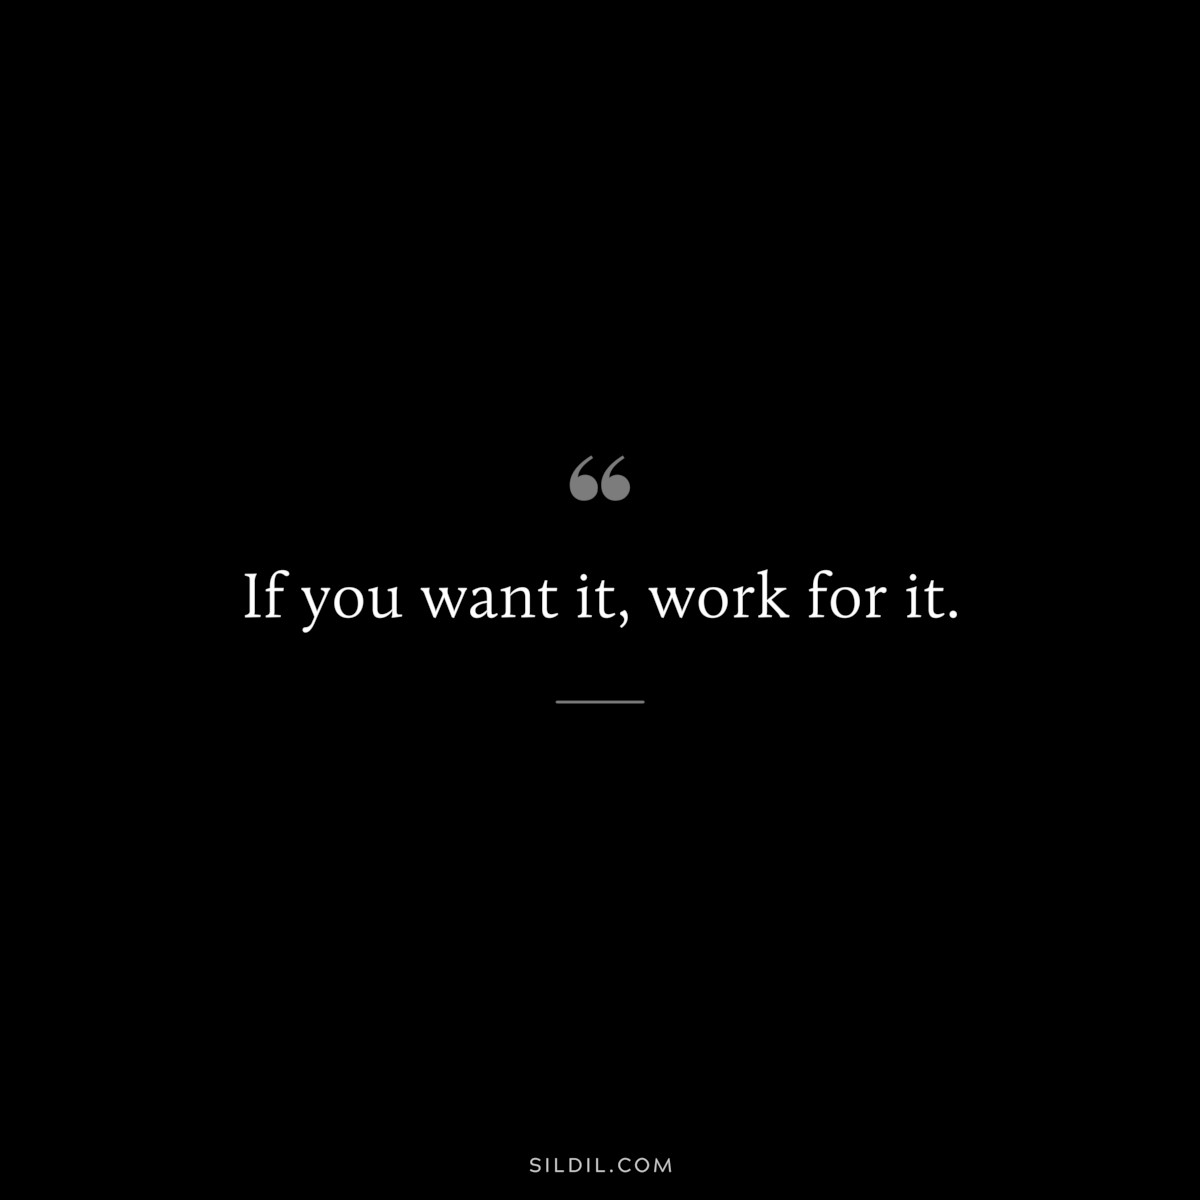 If you want it, work for it.